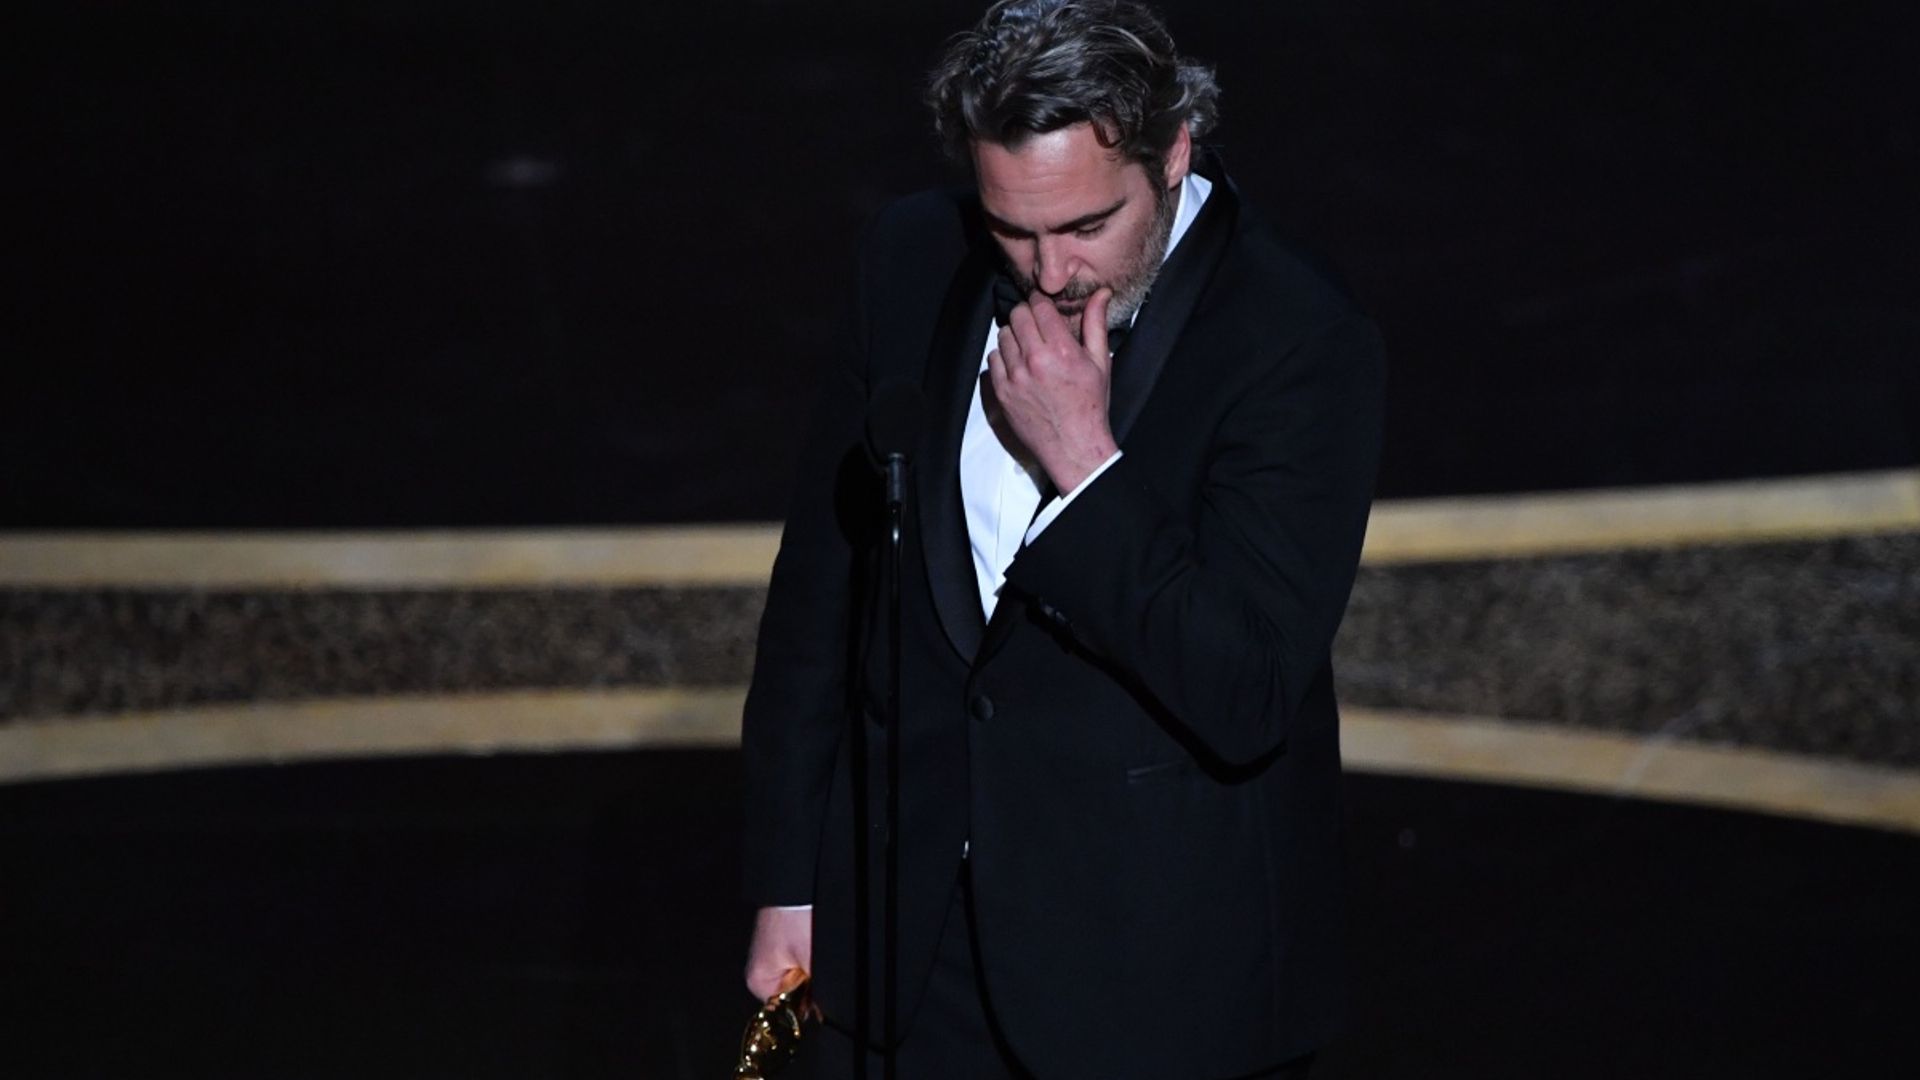 WATCH: Joaquin Phoenix in tears while paying emotional tribute to late brother River during Oscar speech